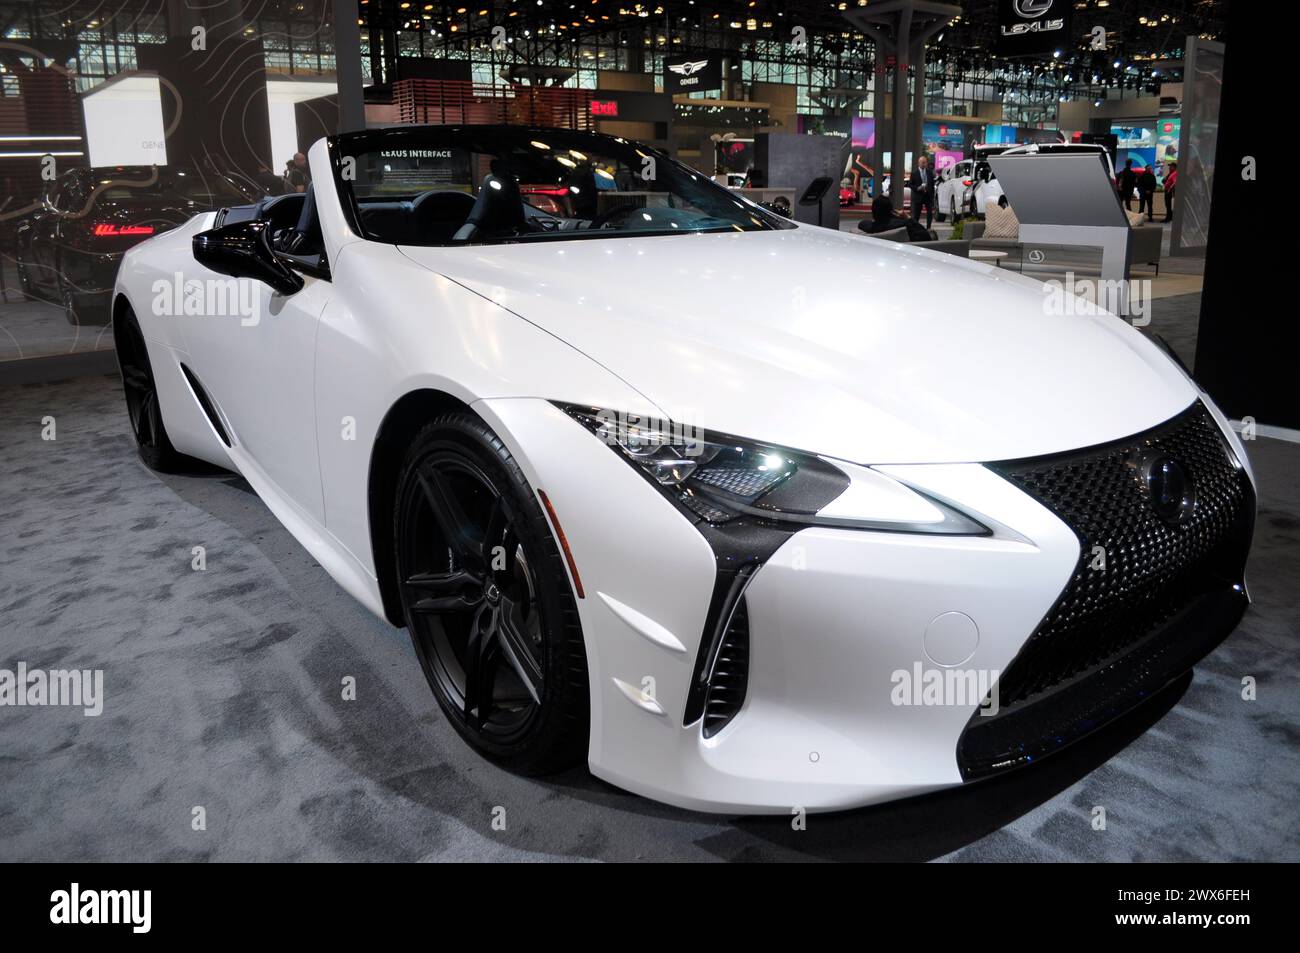 The Lexus LC 500 Convertible vehicle is seen on the first media day at the 2024 New York International Auto Show in the Jacob K. Javits Convention Center. The annual NYIAS in Manhattan, New York City featured various car companies, debuts of new vehicles and automobile industry professionals. The show which opens to the public on March 29 and ends on April 7, attracts thousands of car enthusiasts. The NYIAS began in 1900 showcasing automobiles and examples of future car technology. (Photo by Jimin Kim/SOPA Images/Sipa USA) Stock Photo